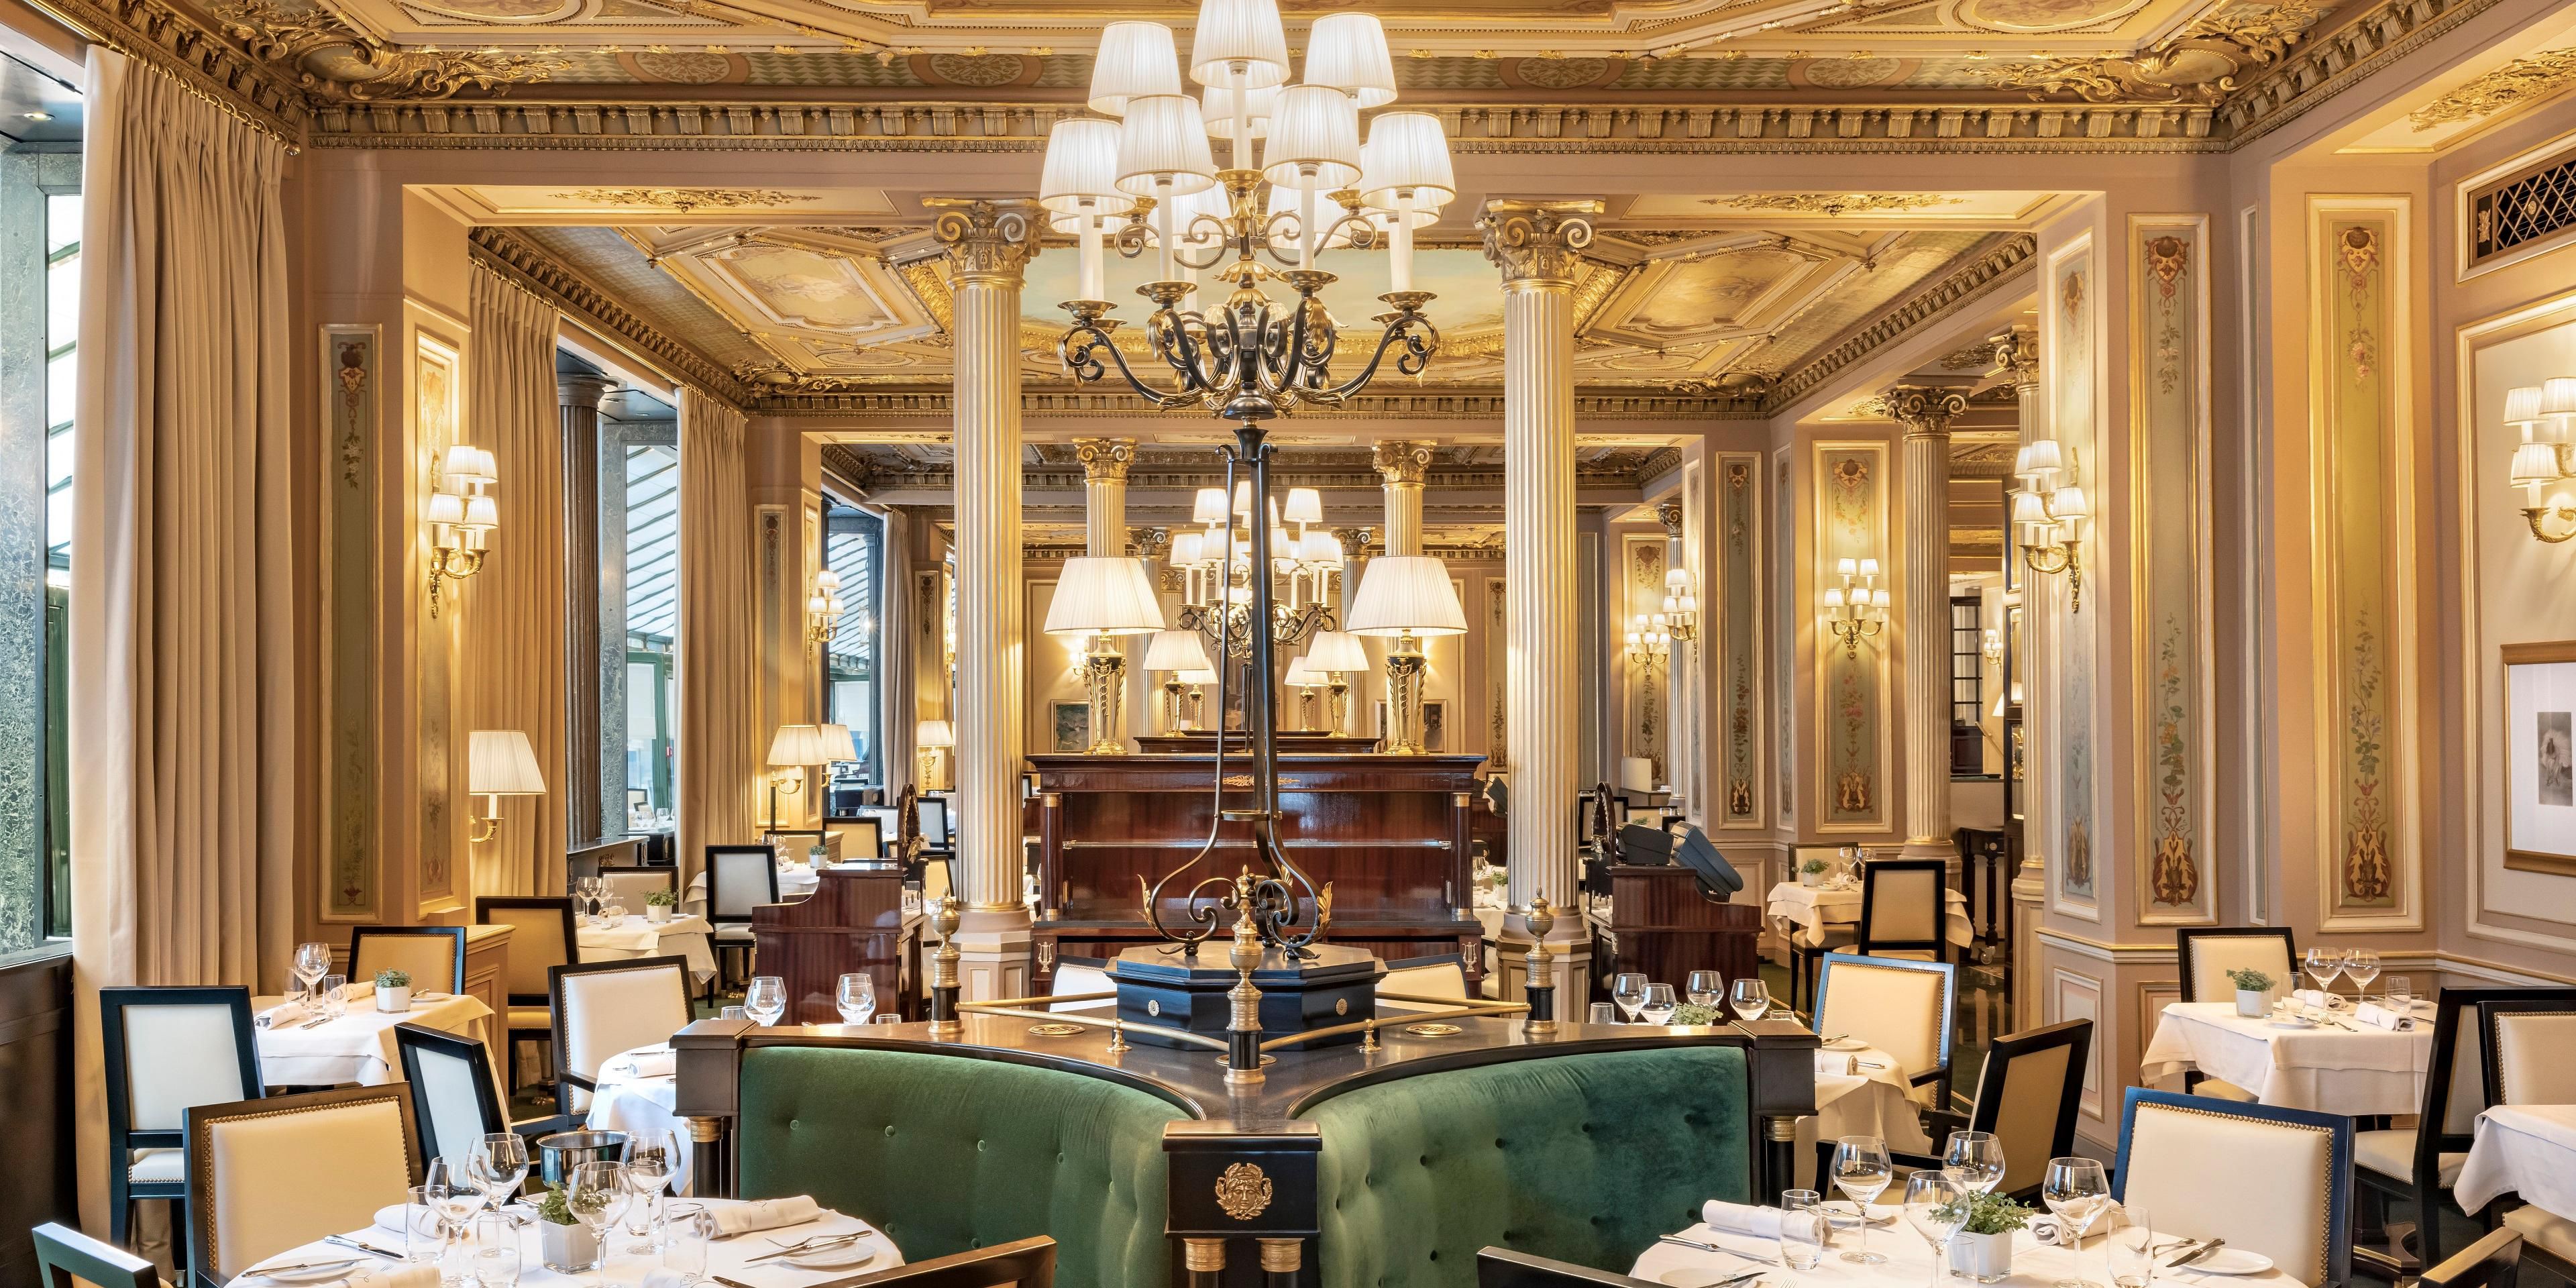 Discover the historic setting of the Café de la Paix, a legend of Parisian life since 1862.
Chef Laurent André offers the classics of French gastronomy for exceptional moments facing the Opera Garnier.